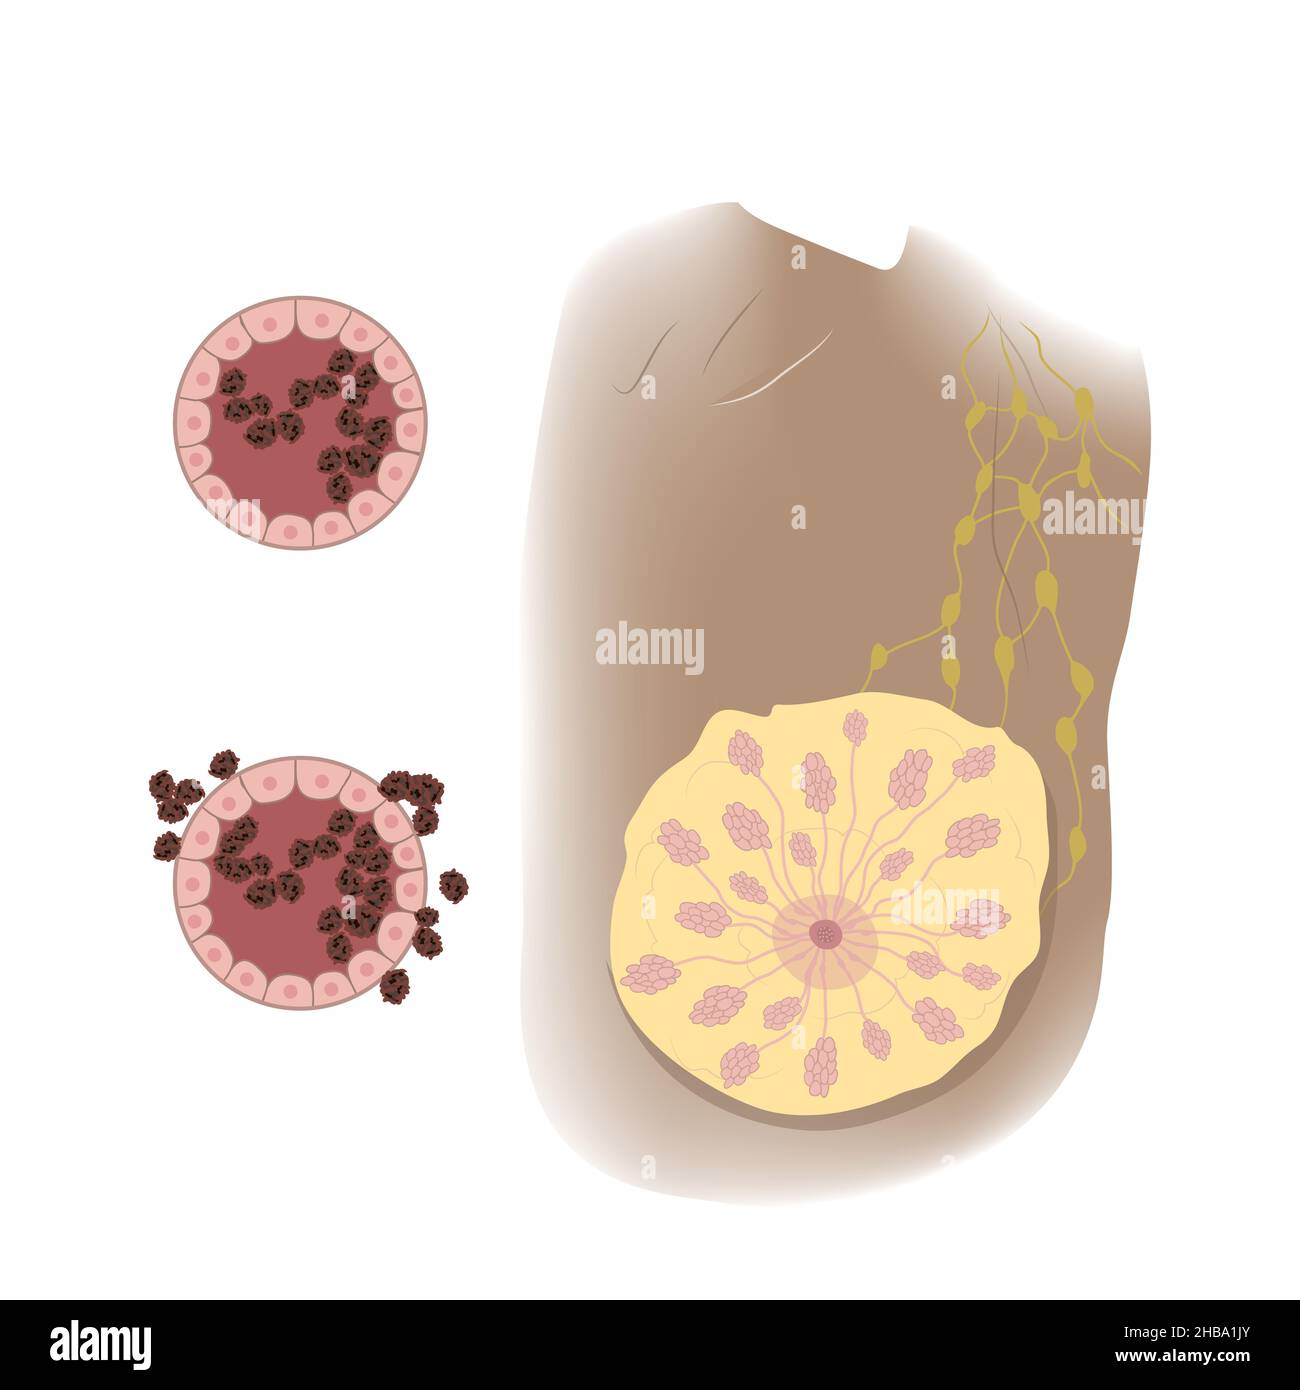 Ductal cancer in female breast, illustration. In situ and invasive stages. Stock Photo